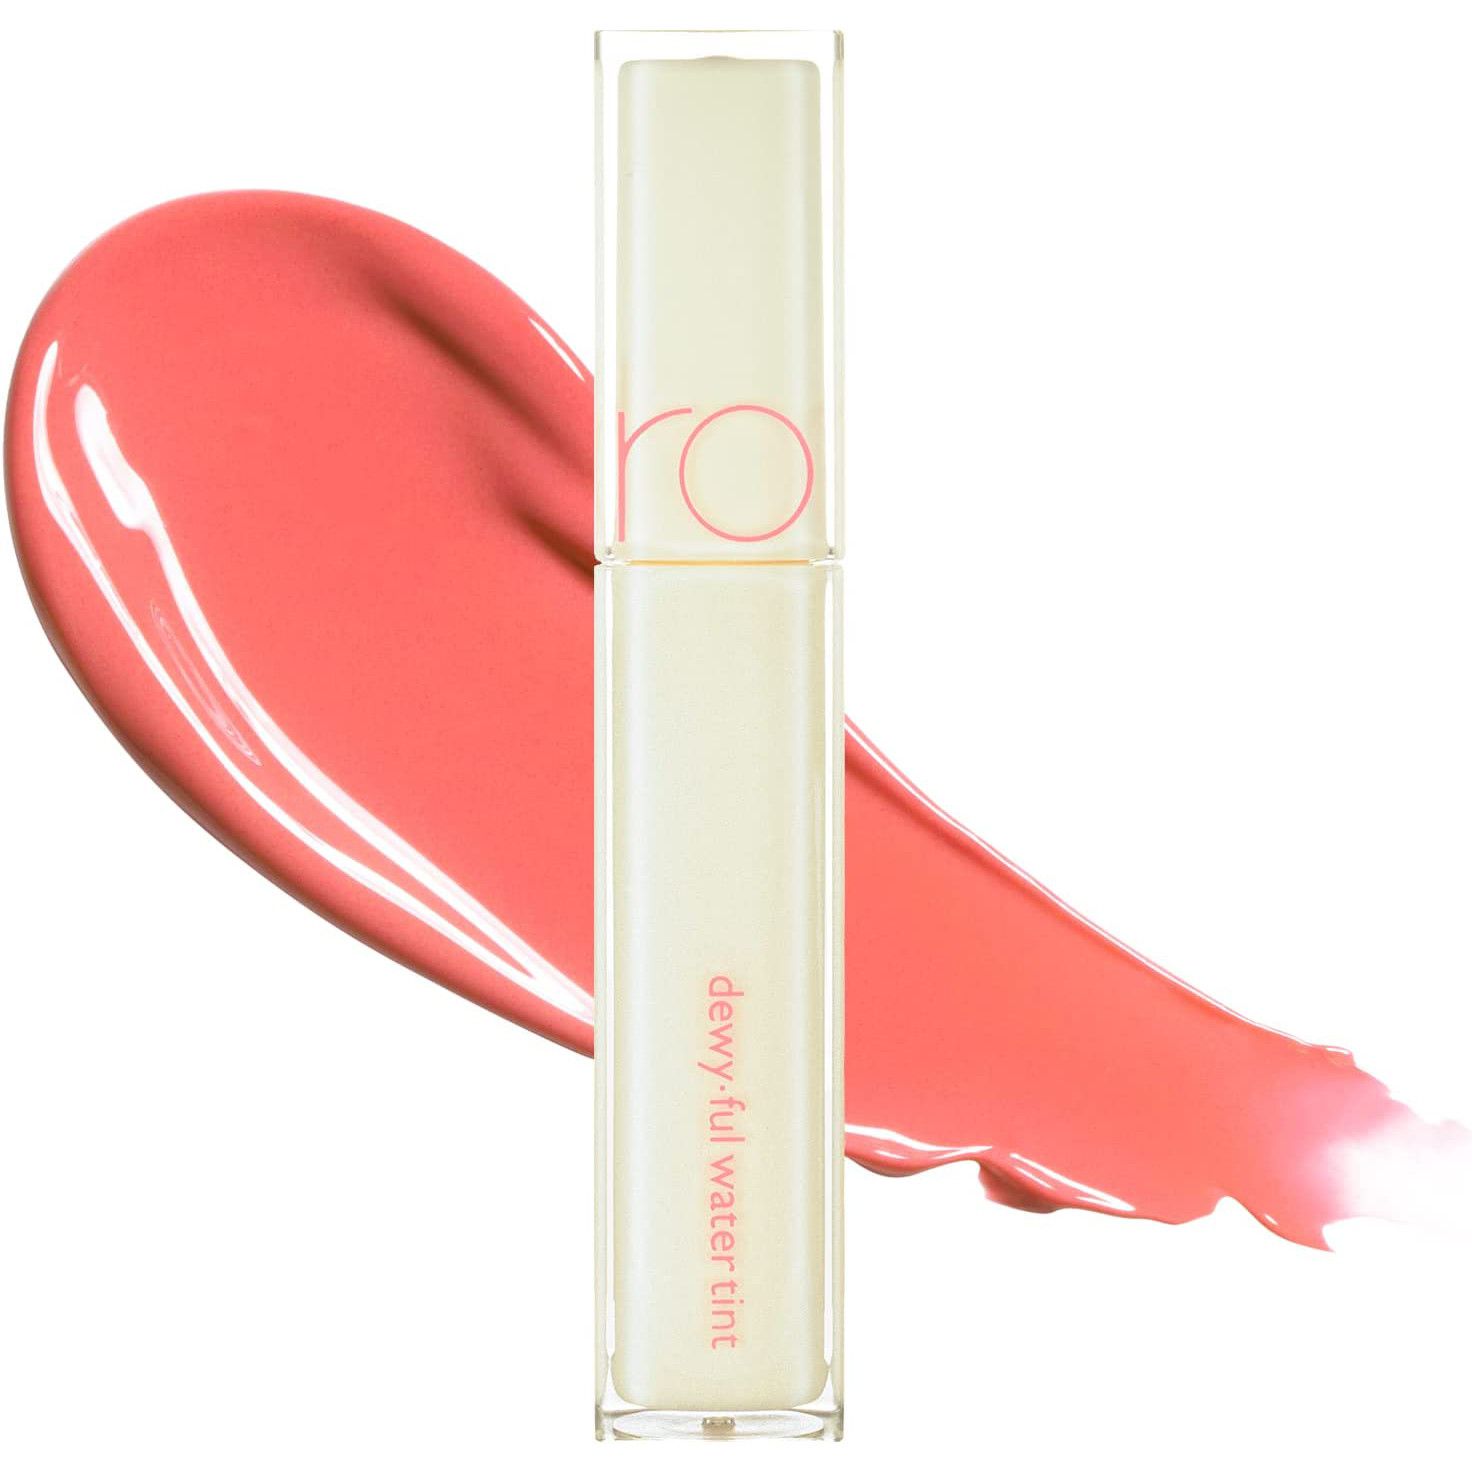 rom&nd DEWY·FUL WATER TINT 09 COTTON MELBAのバリエーション9